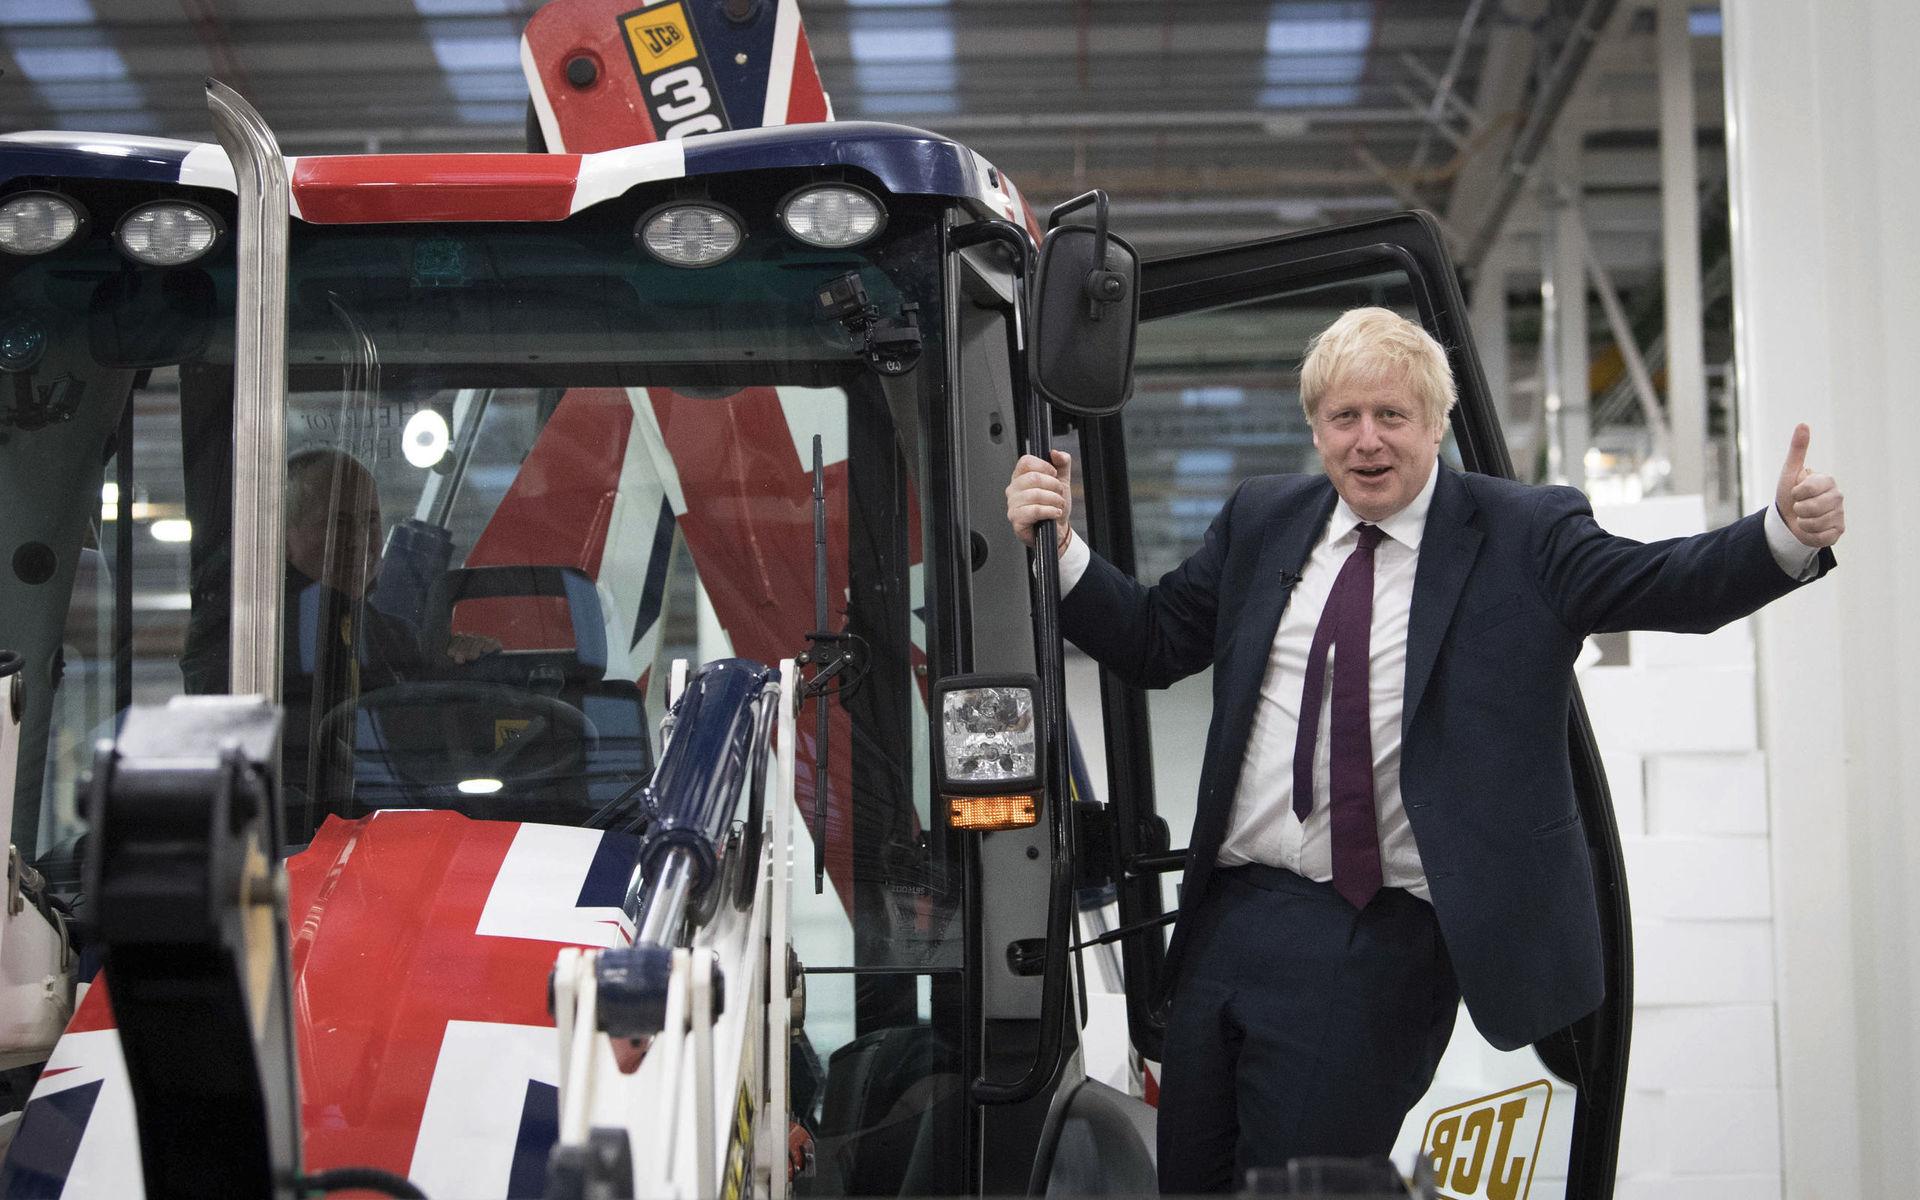 Britain&apos;s Prime Minister Boris Johnson signals to the media during an election campaign visit to the JCB manufacturing facility in Uttoxeter, England, Tuesday Dec. 10, 2019.  The Conservative Party are campaigning for their Brexit split with Europe ahead of the UK&apos;s General Election on Dec. 12.(Stefan Rousseau/PA via AP)  WRC828